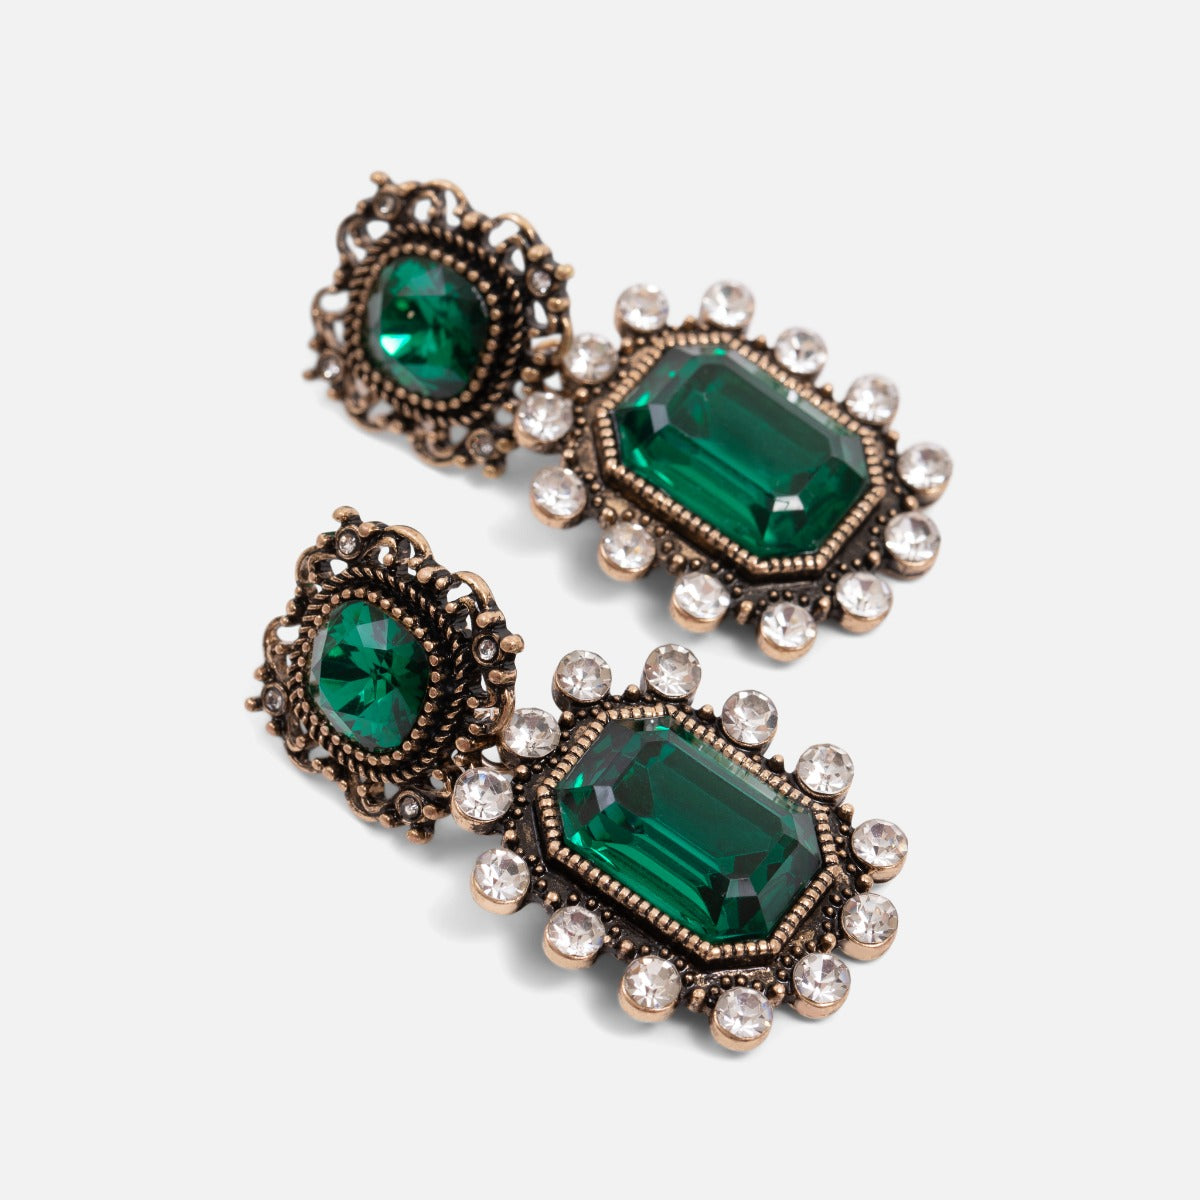 Emerald earrings and glittering stone pendent